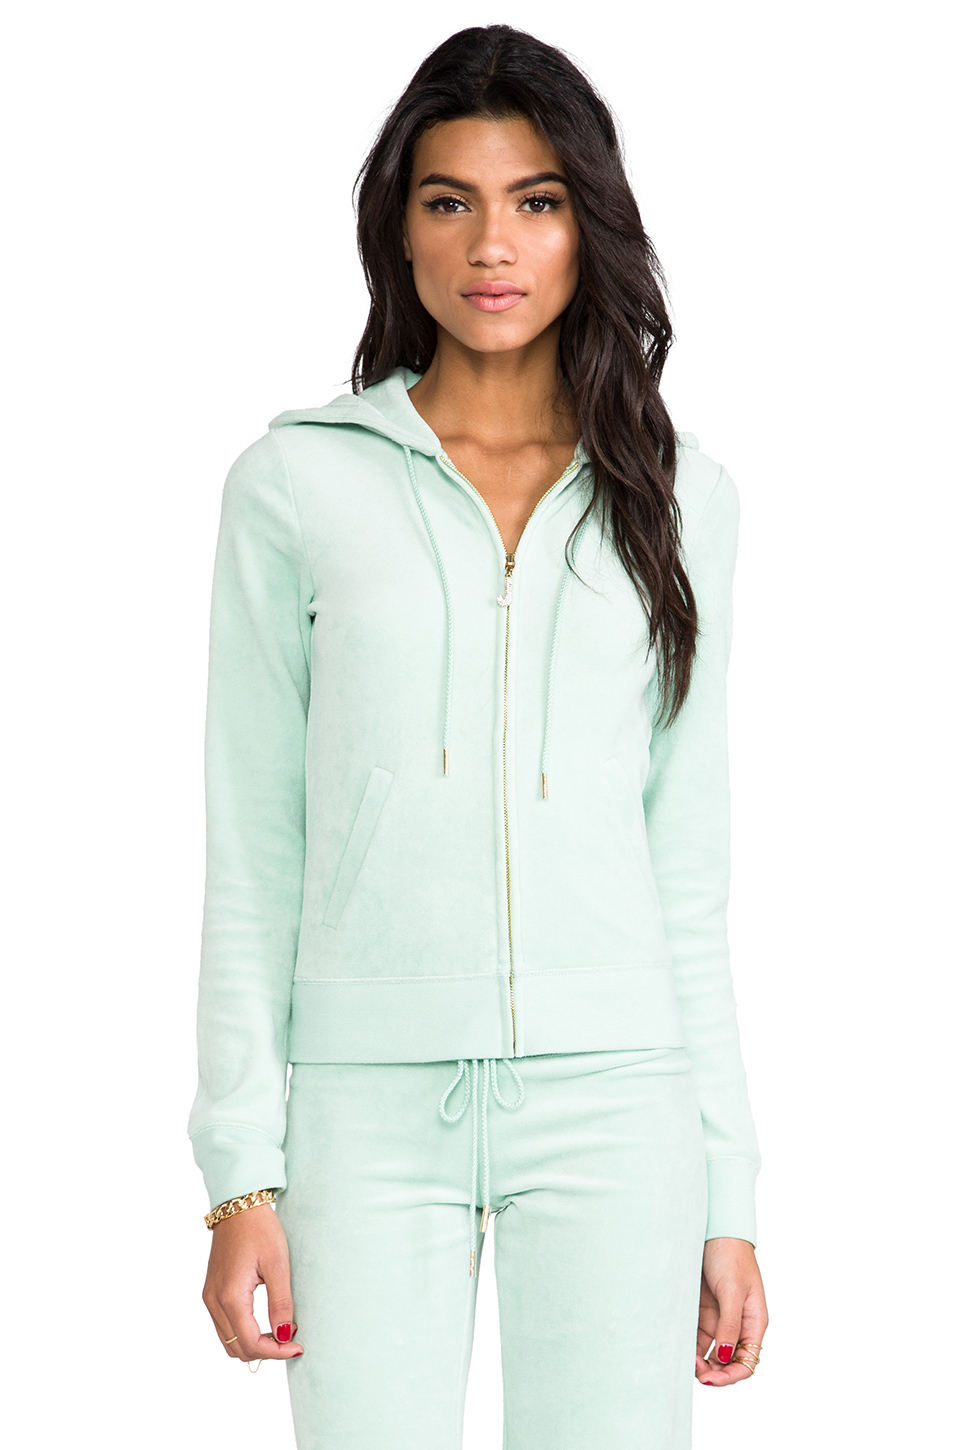 Juicy Couture J Bling Hoodie in Mint in Green - Lyst